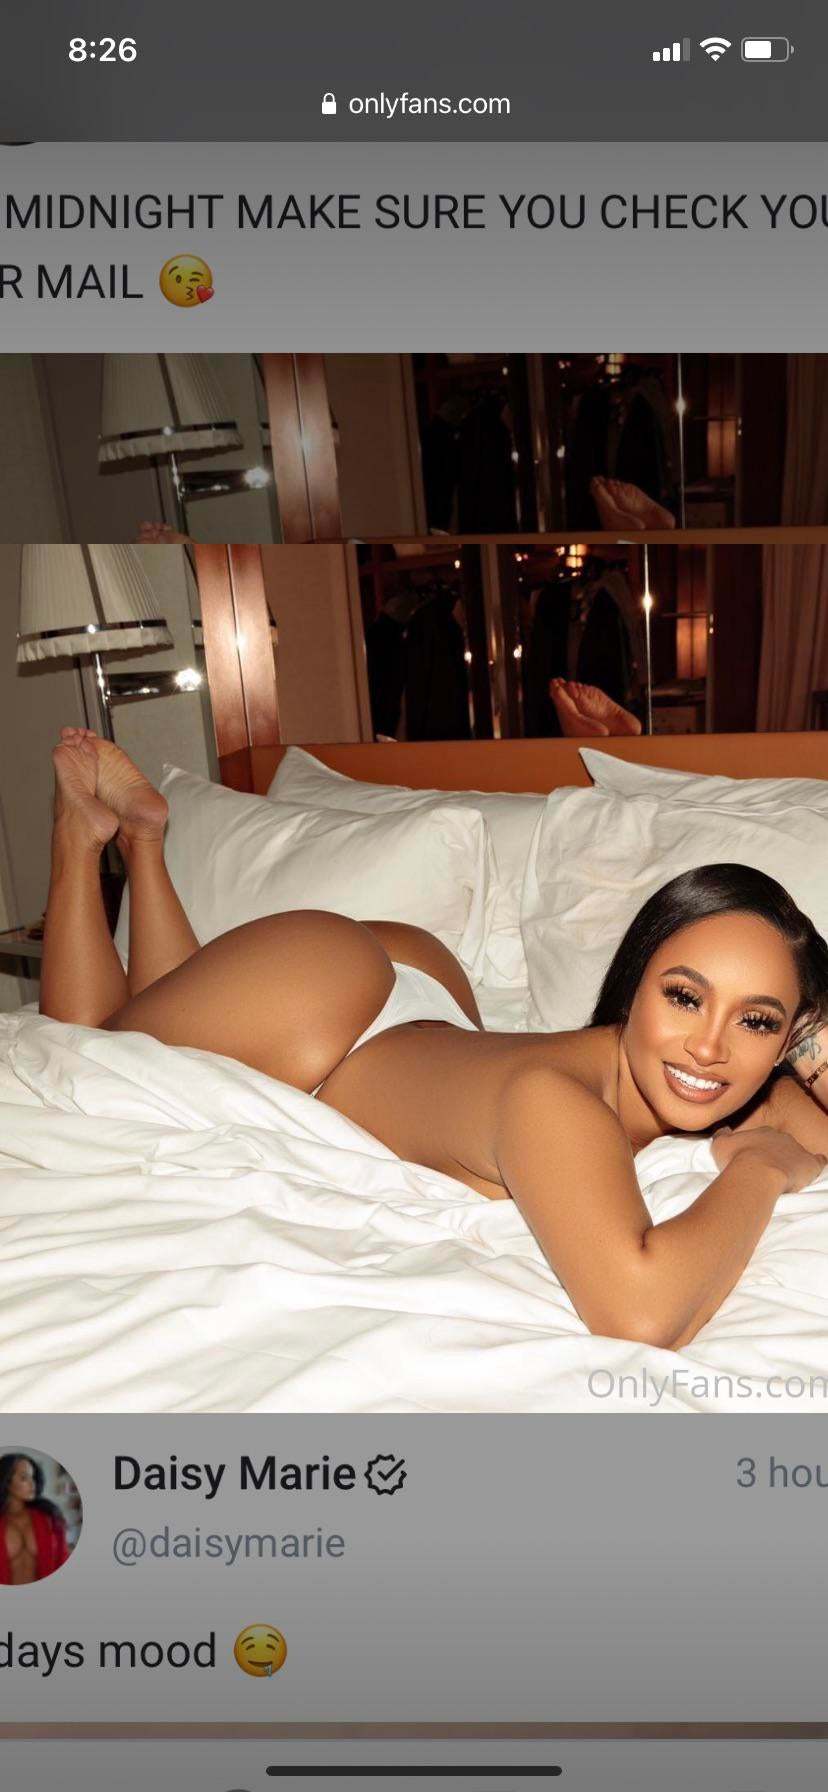 Tahiry only fans